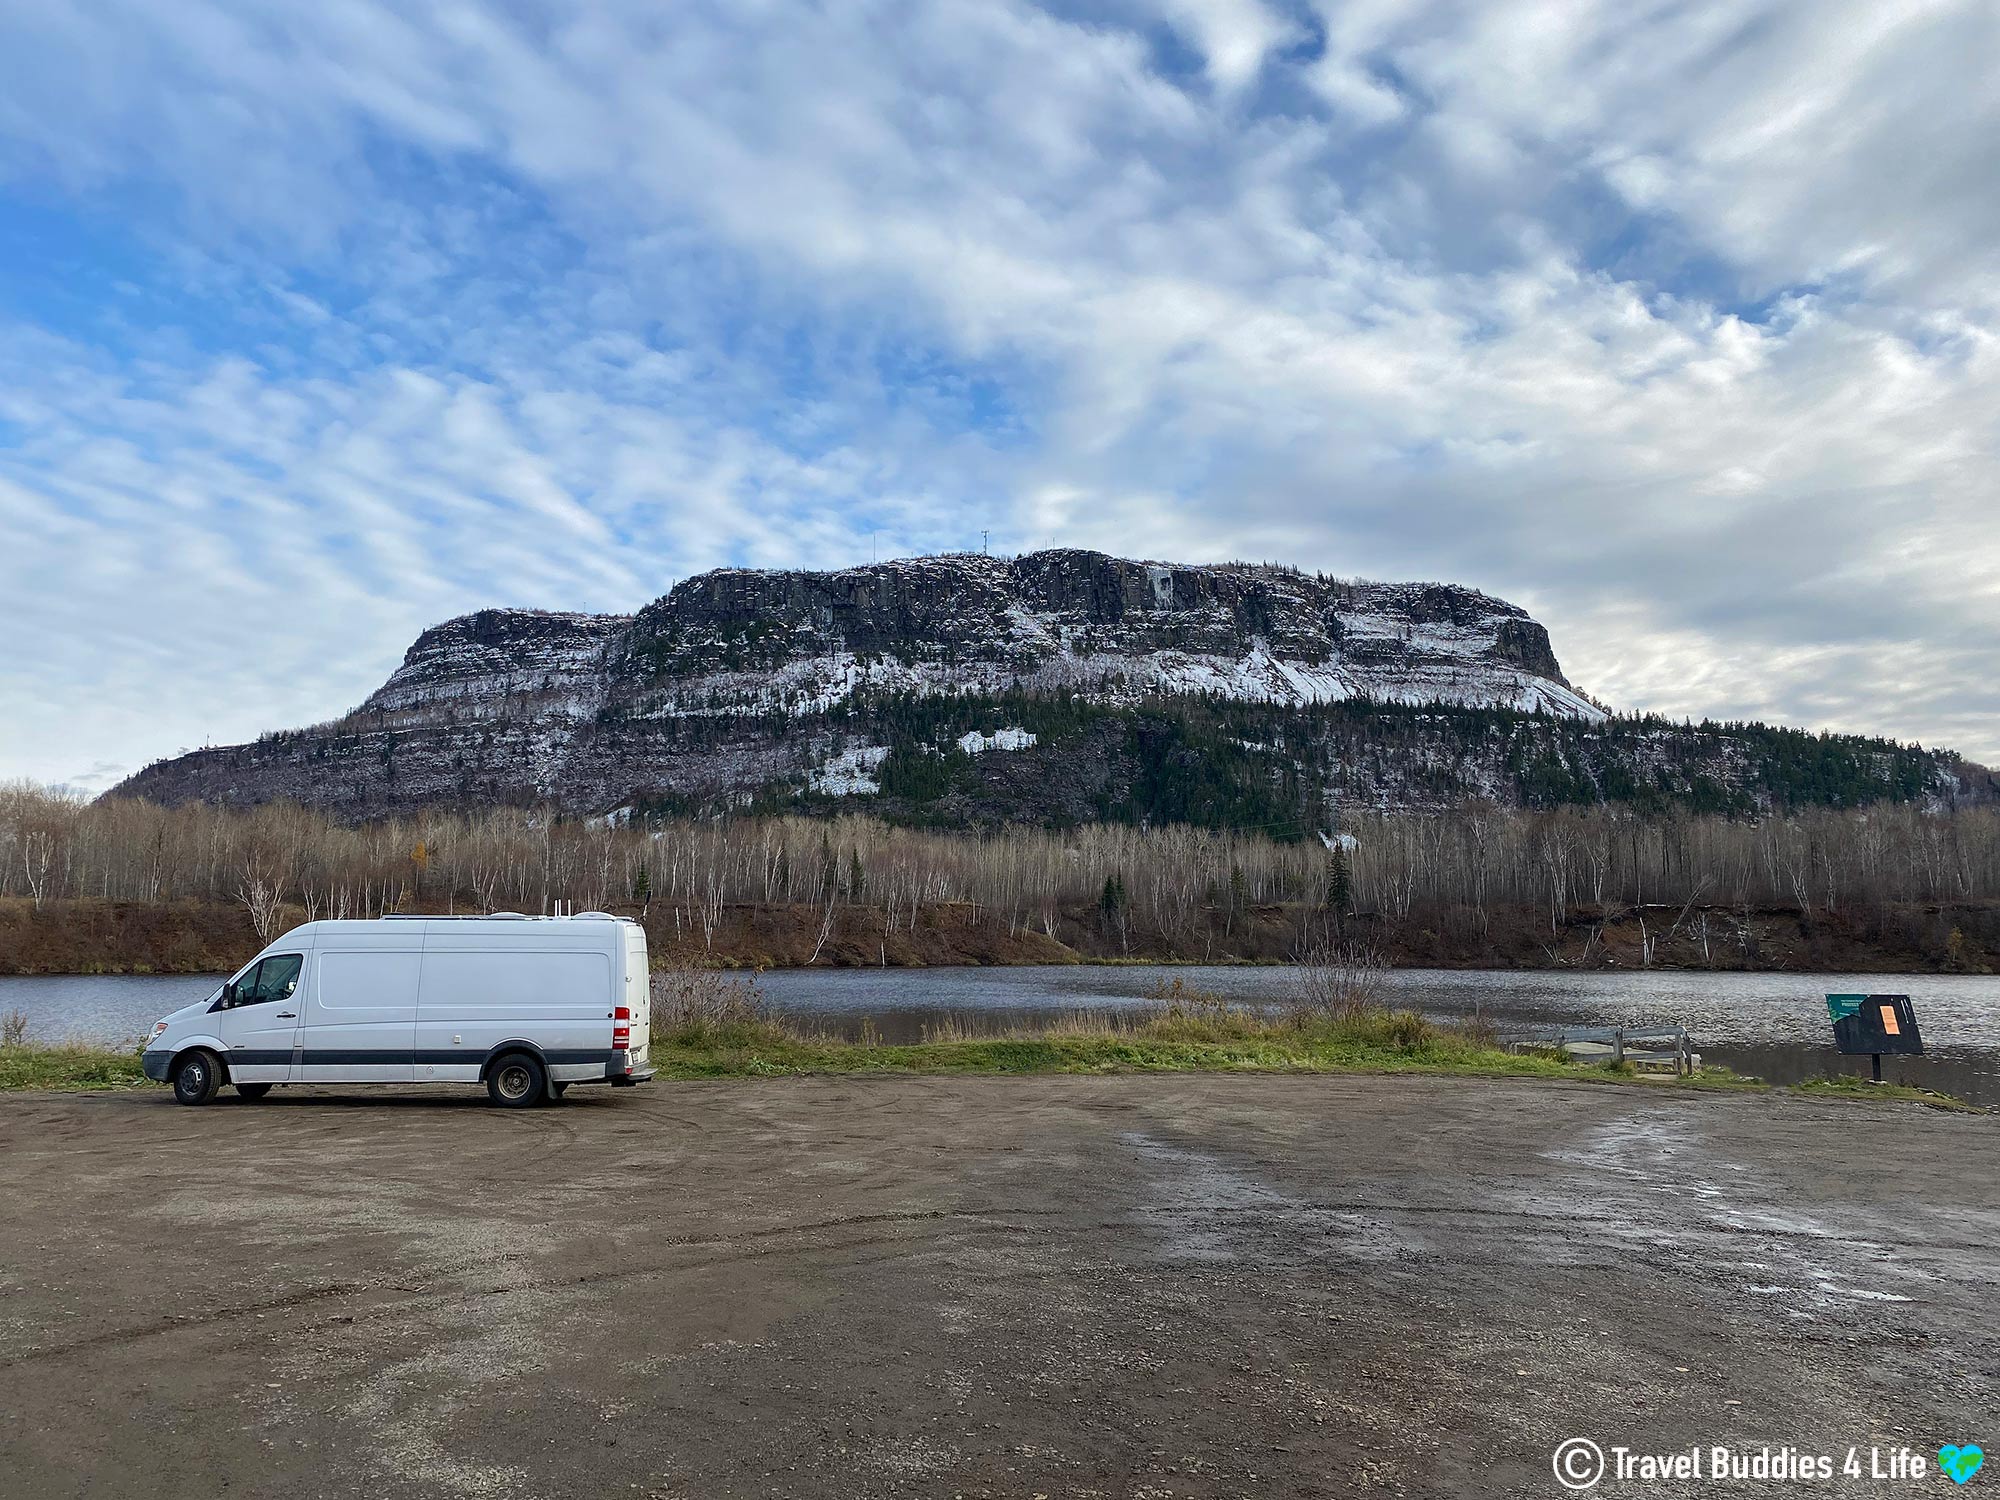 The Van Parked At The Base Of A Mountain In Thunder Bay, Northern Ontario, Canada